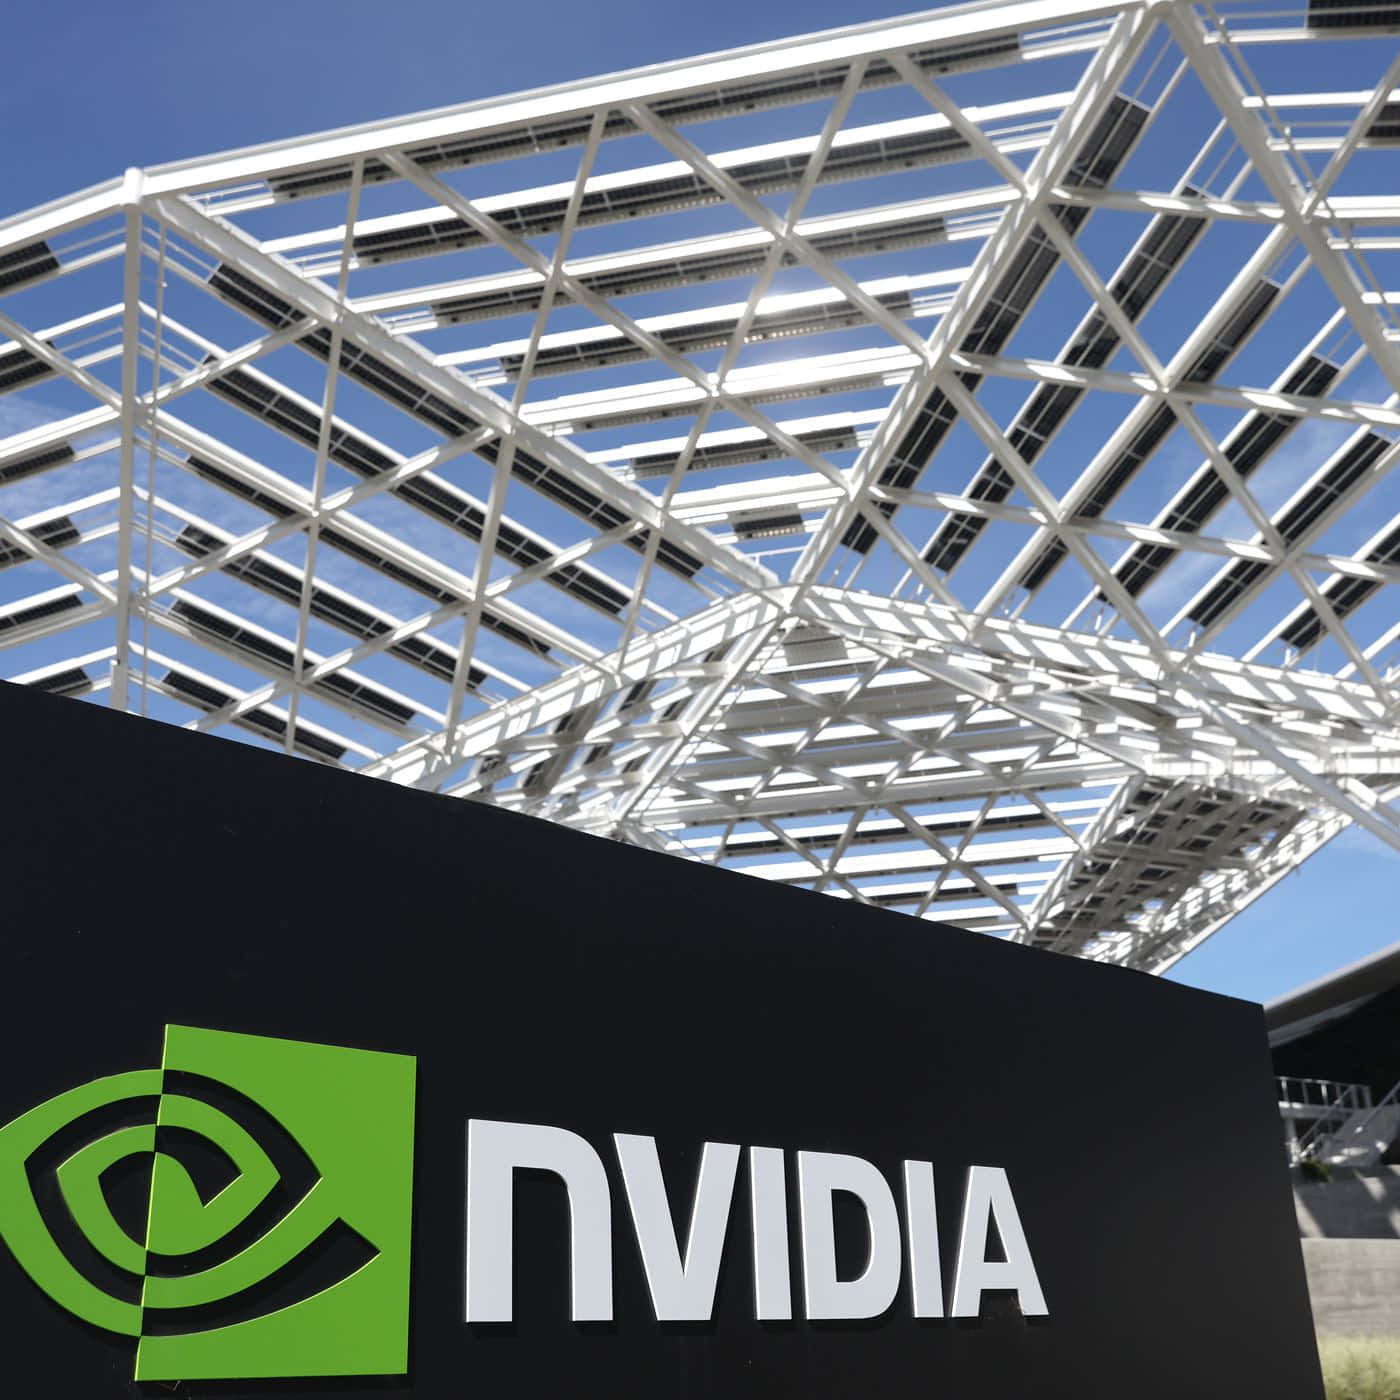 "Speed Up Your Workflows With Nvidia"